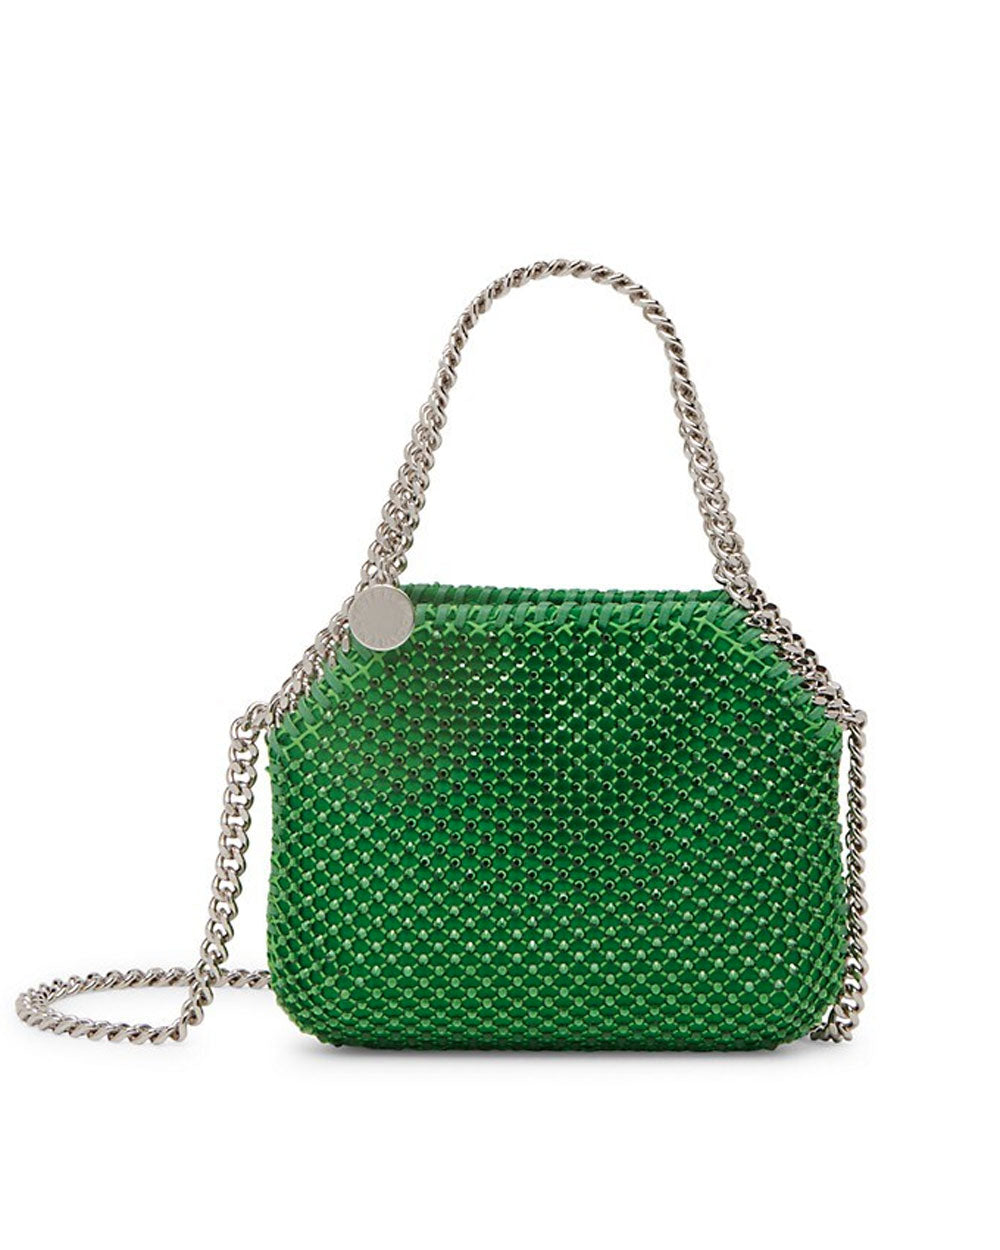 How To Spot A Real Stella McCartney Falabella Bag